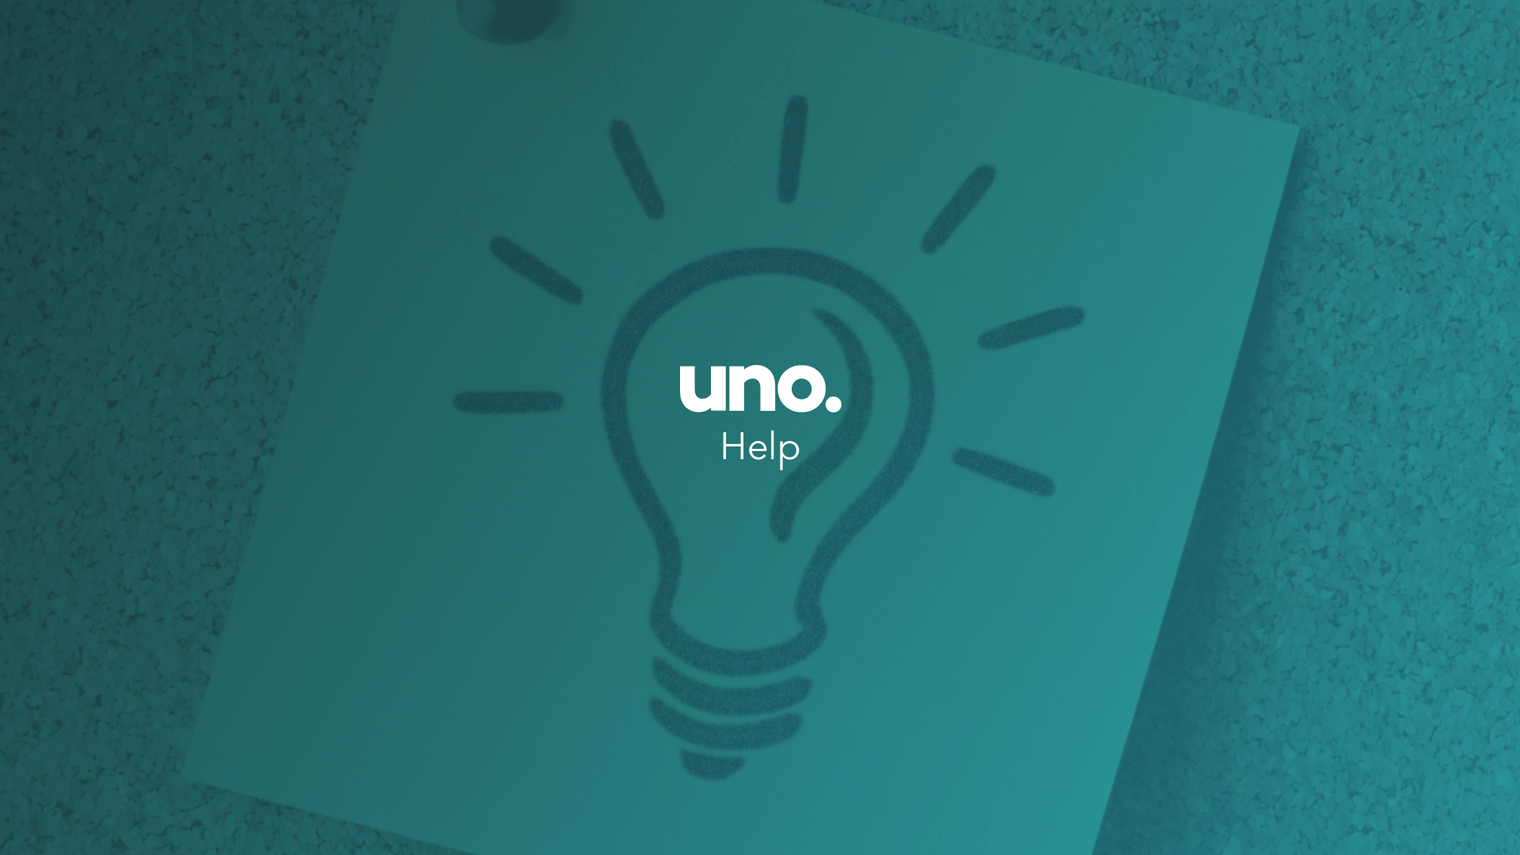 How secure is uno and how is my data stored?